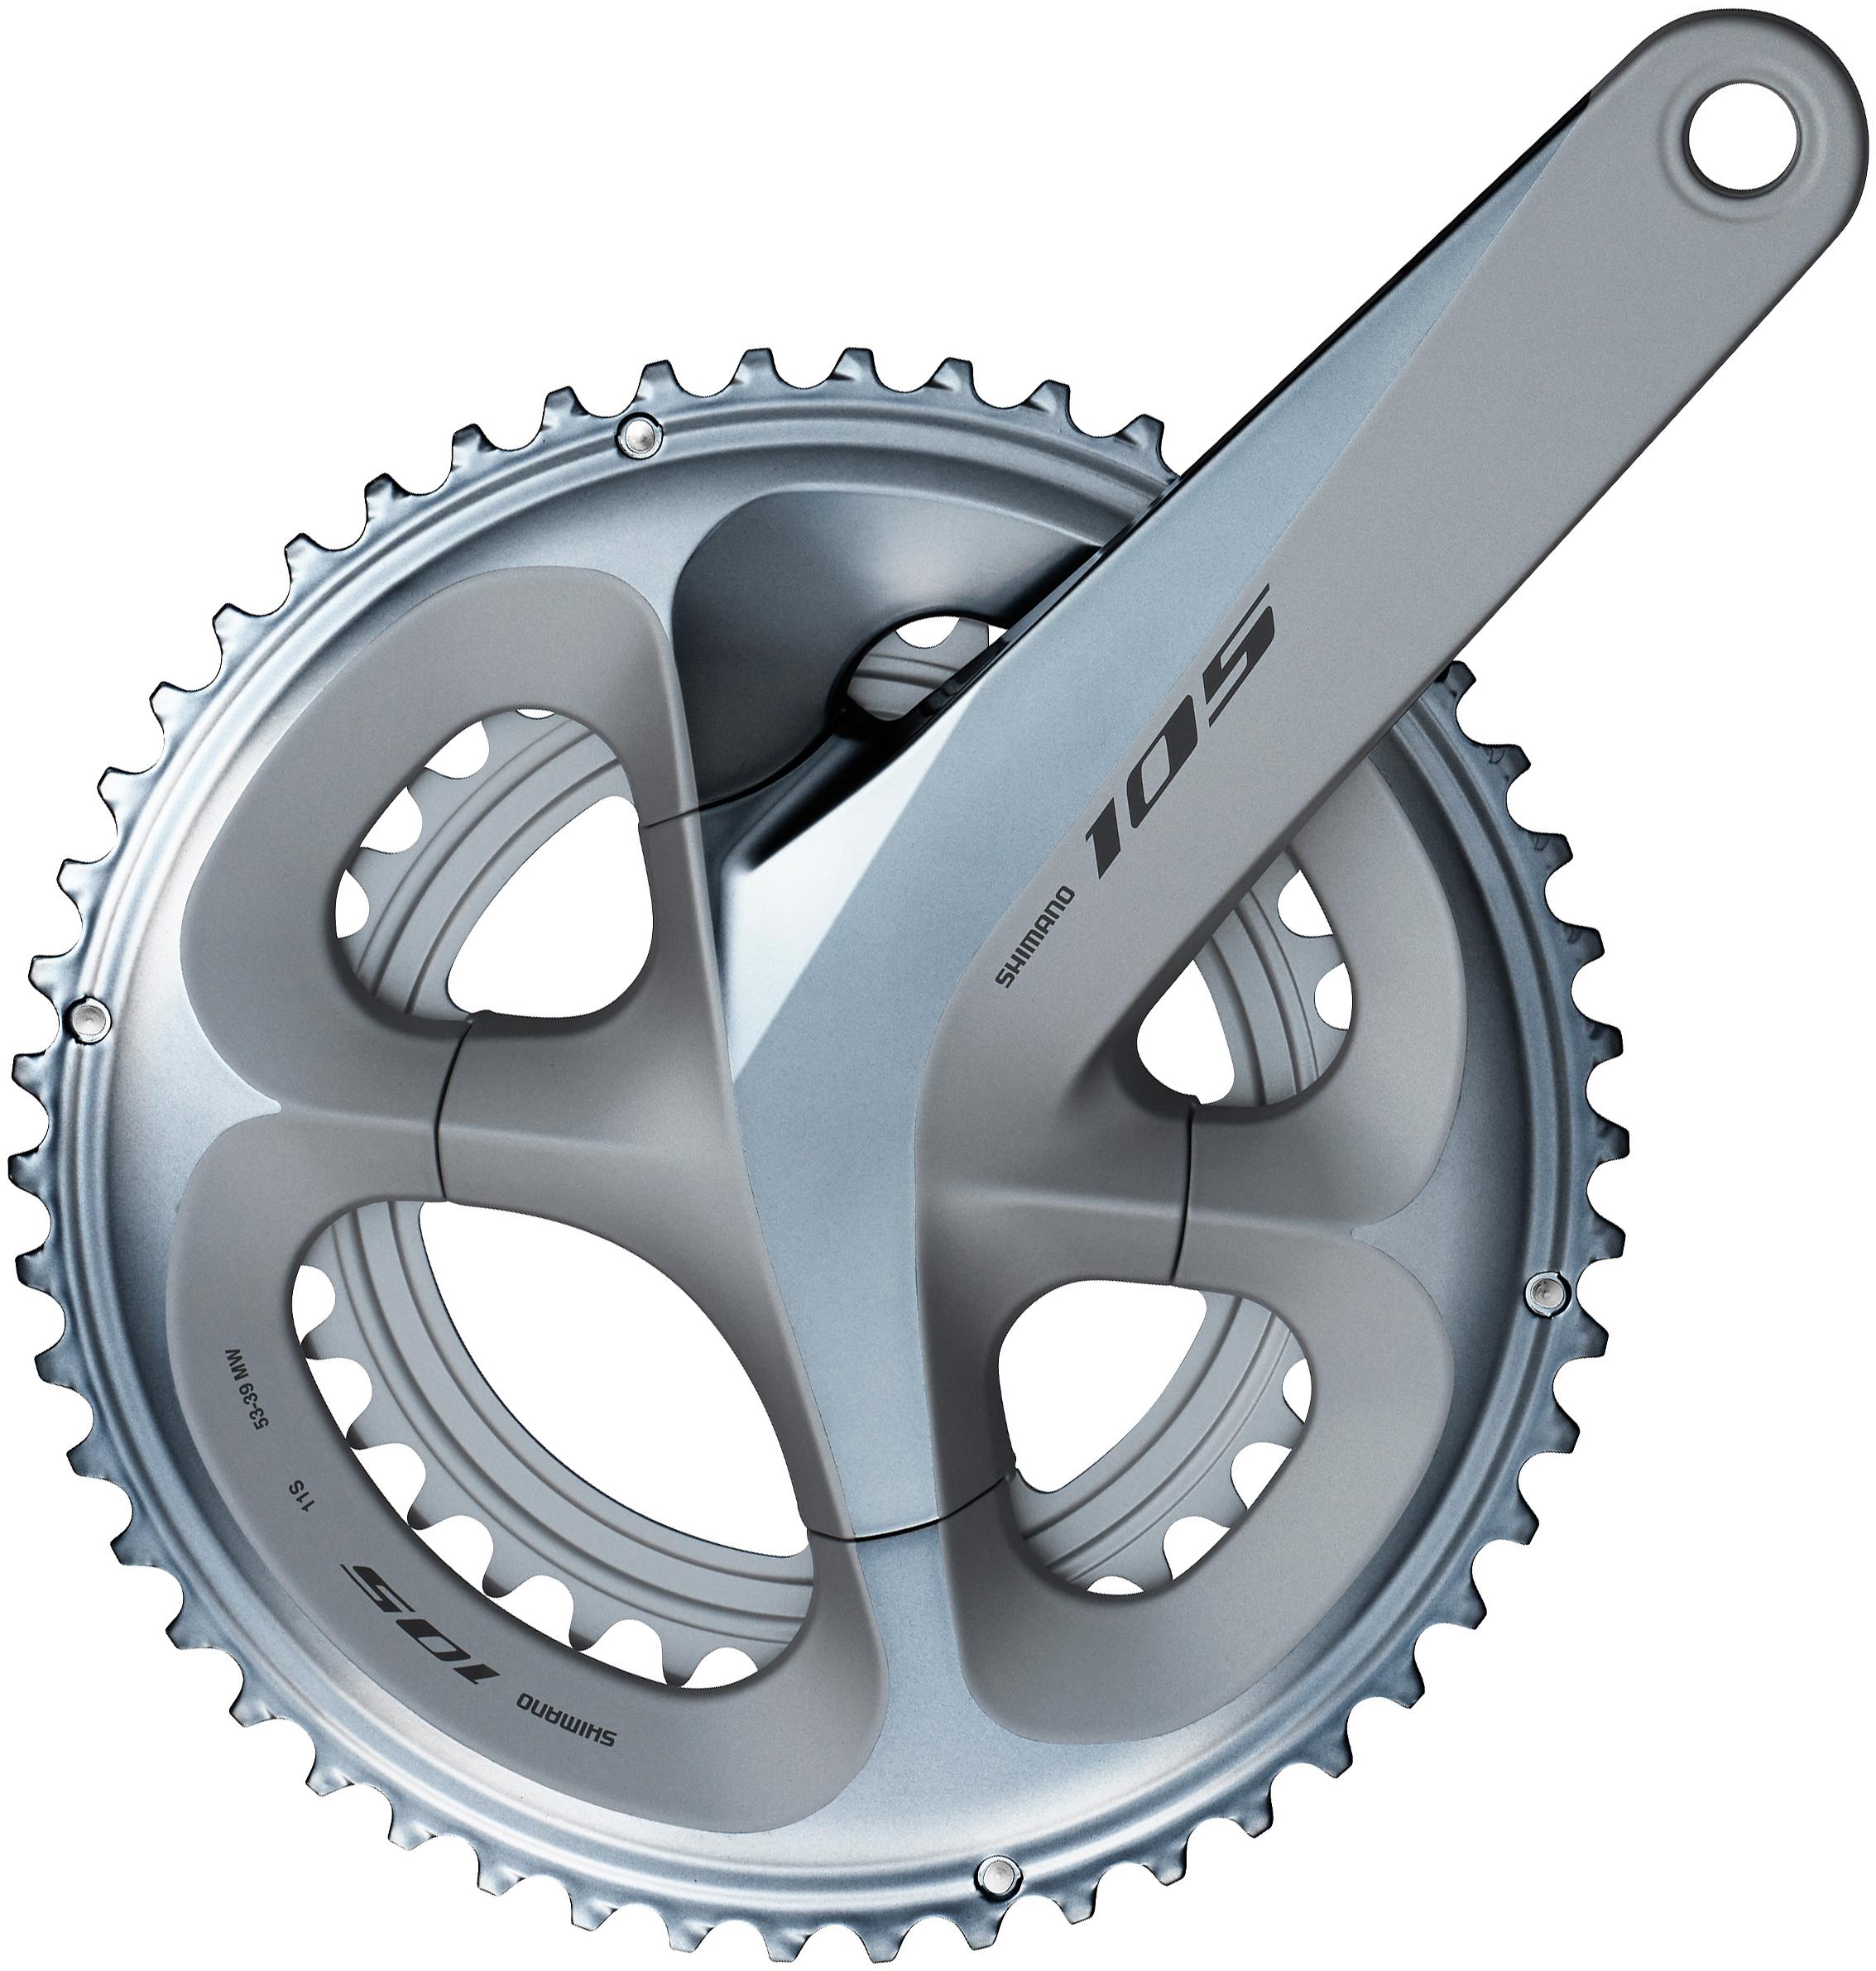 Shimano 105 R7000 11 Speed Road Double Chainset  Silver